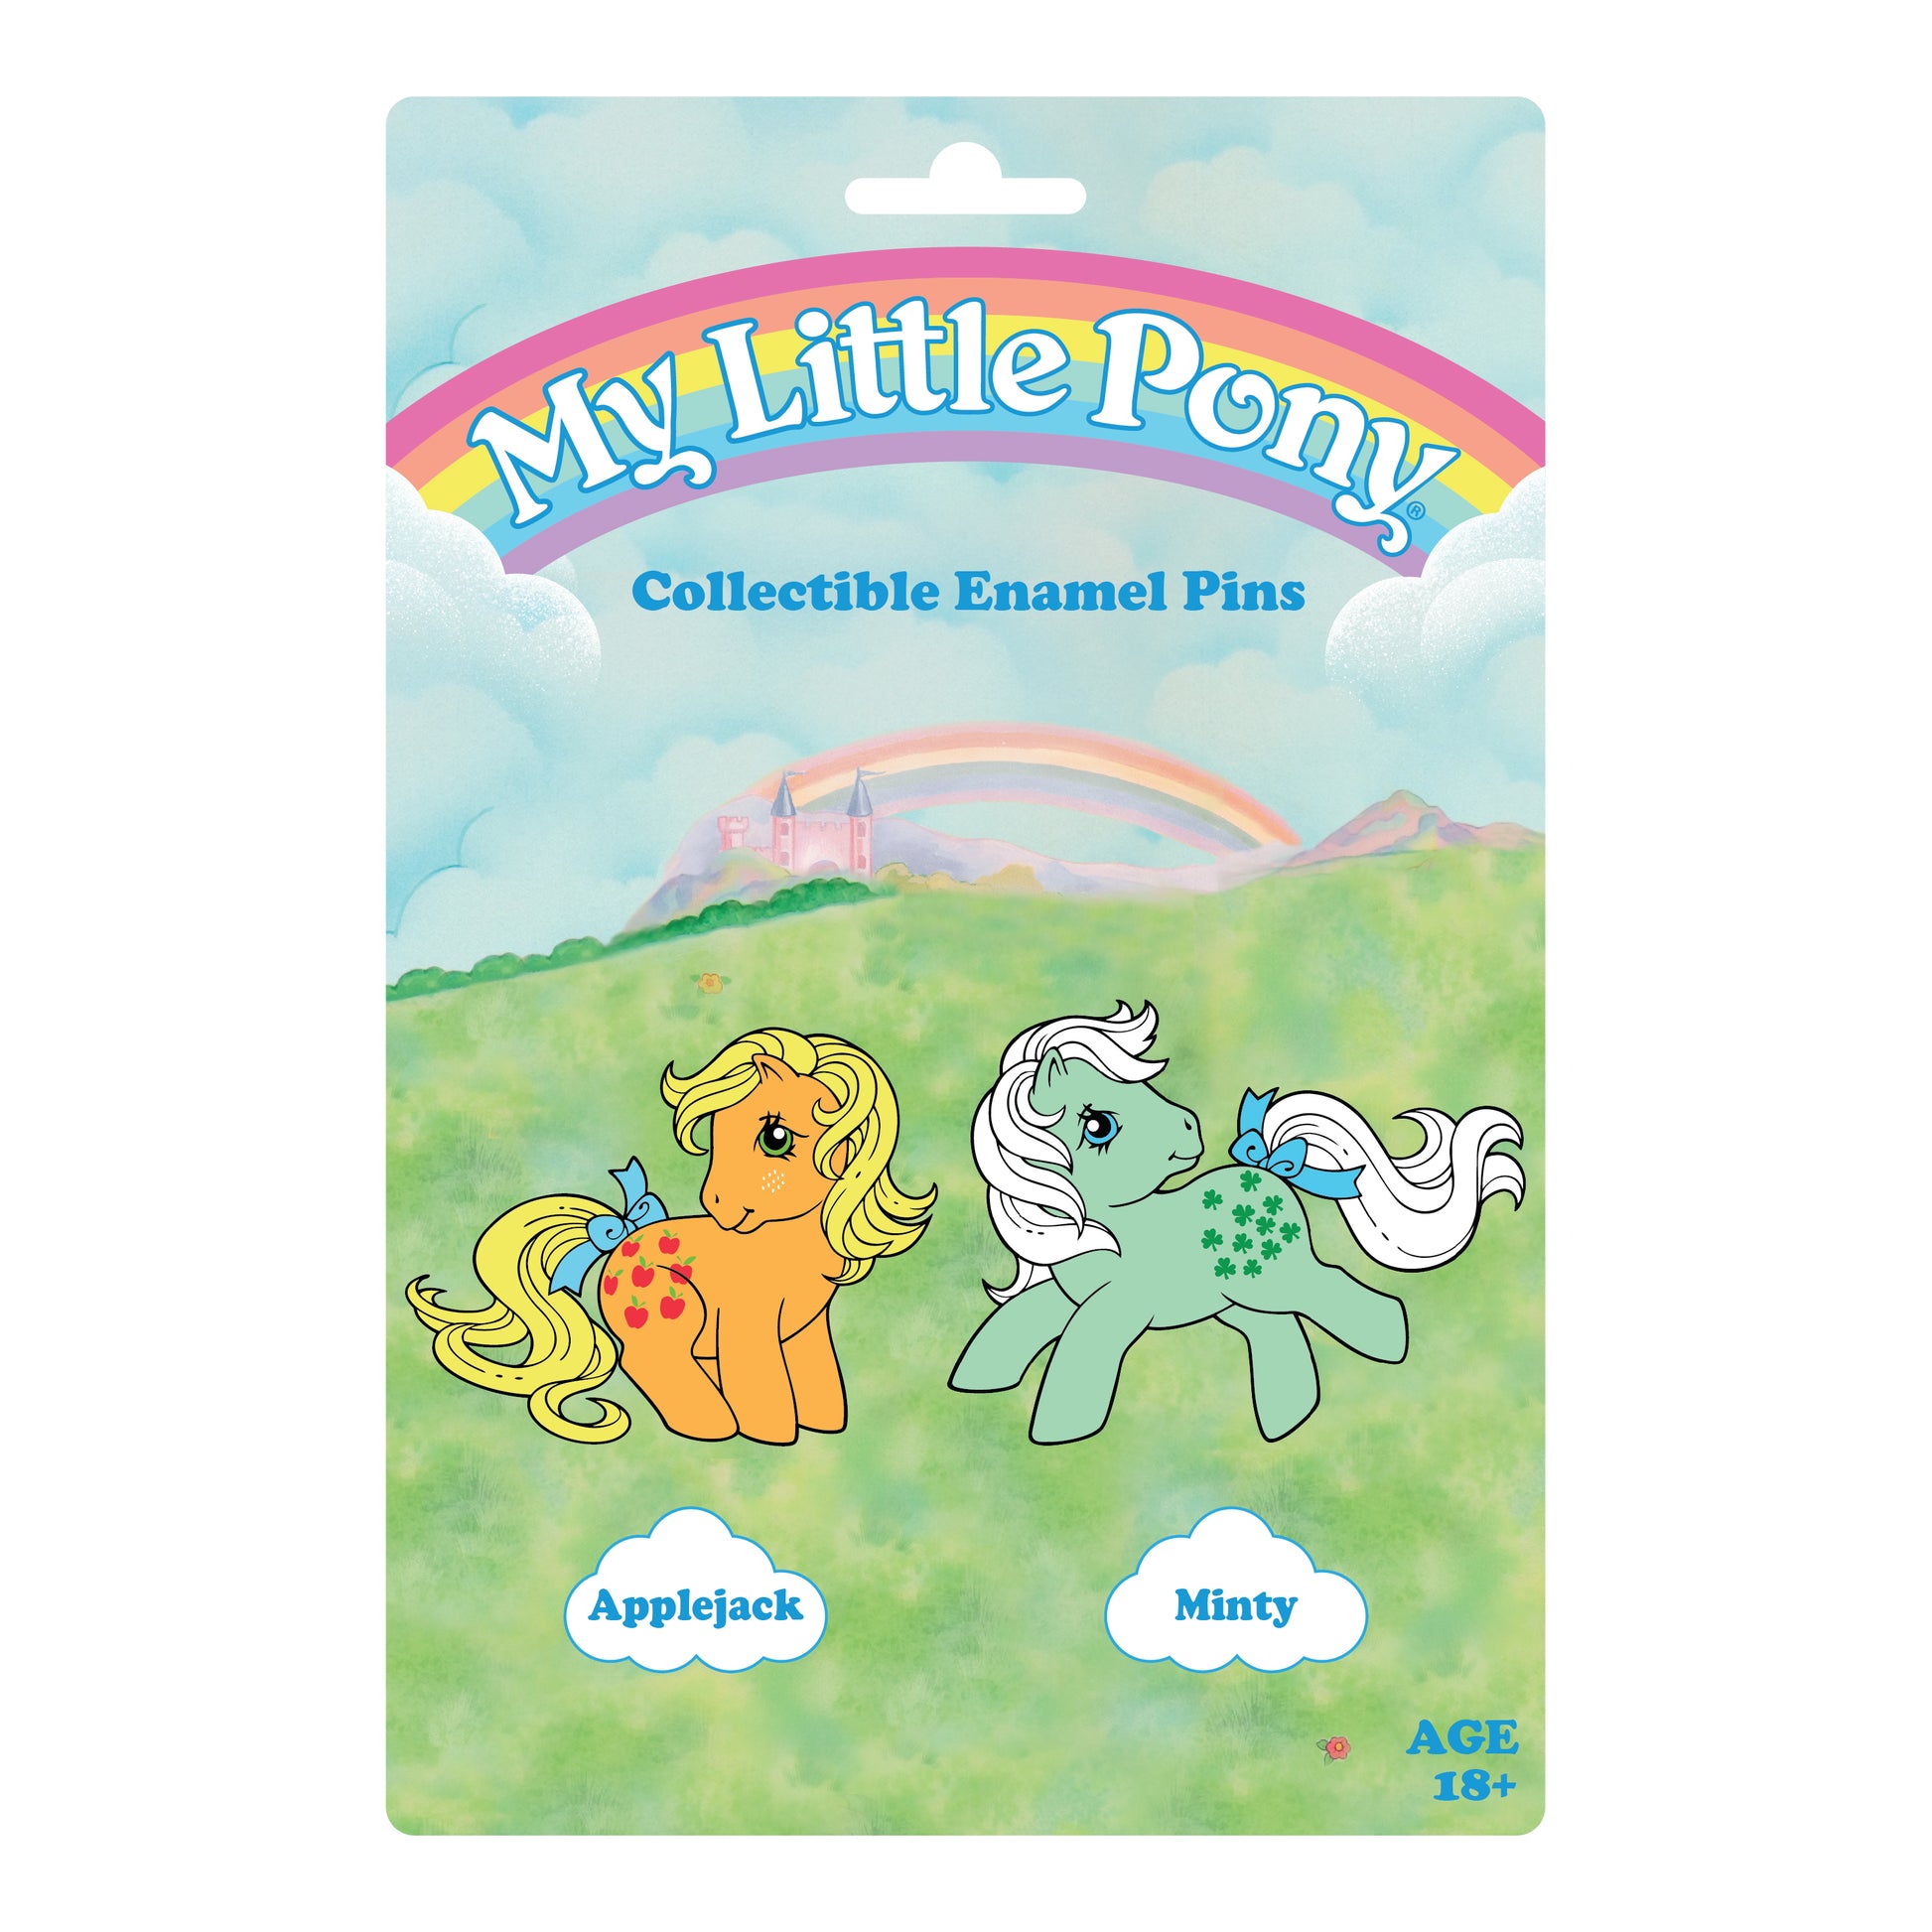 My Little Pony Applejack X Minty Pin Set - Available 4th Quarter 2021 - Icon Heroes 